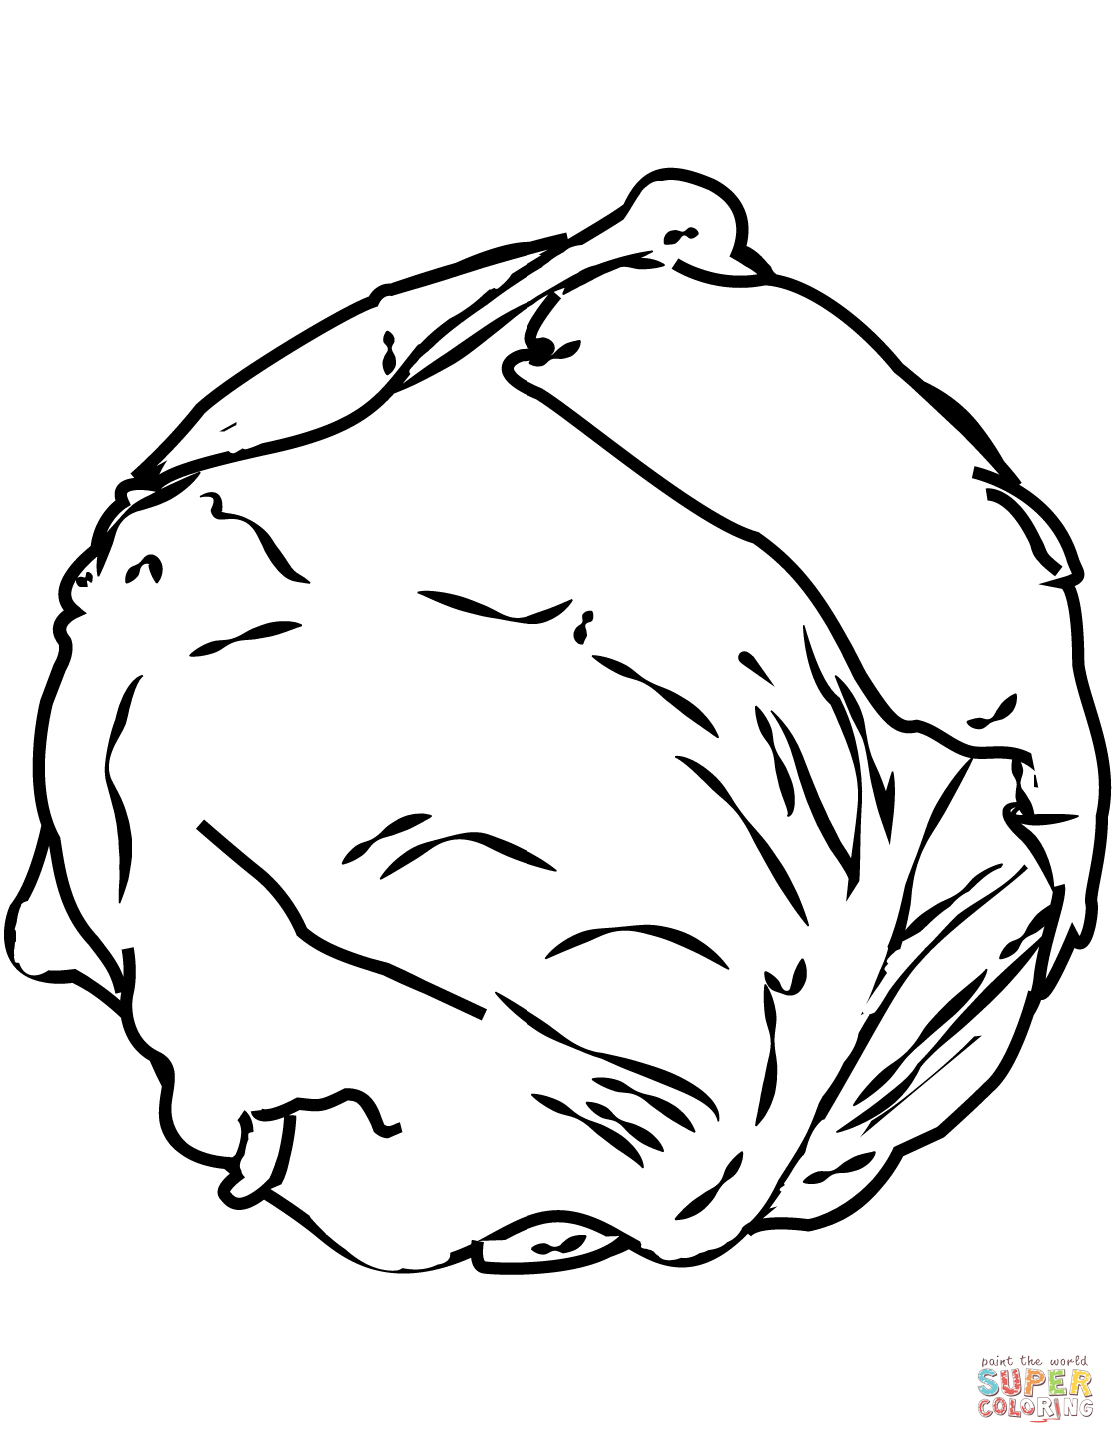 Vegetables Coloring Page Vegetables Coloring Pages Free Coloring Pages